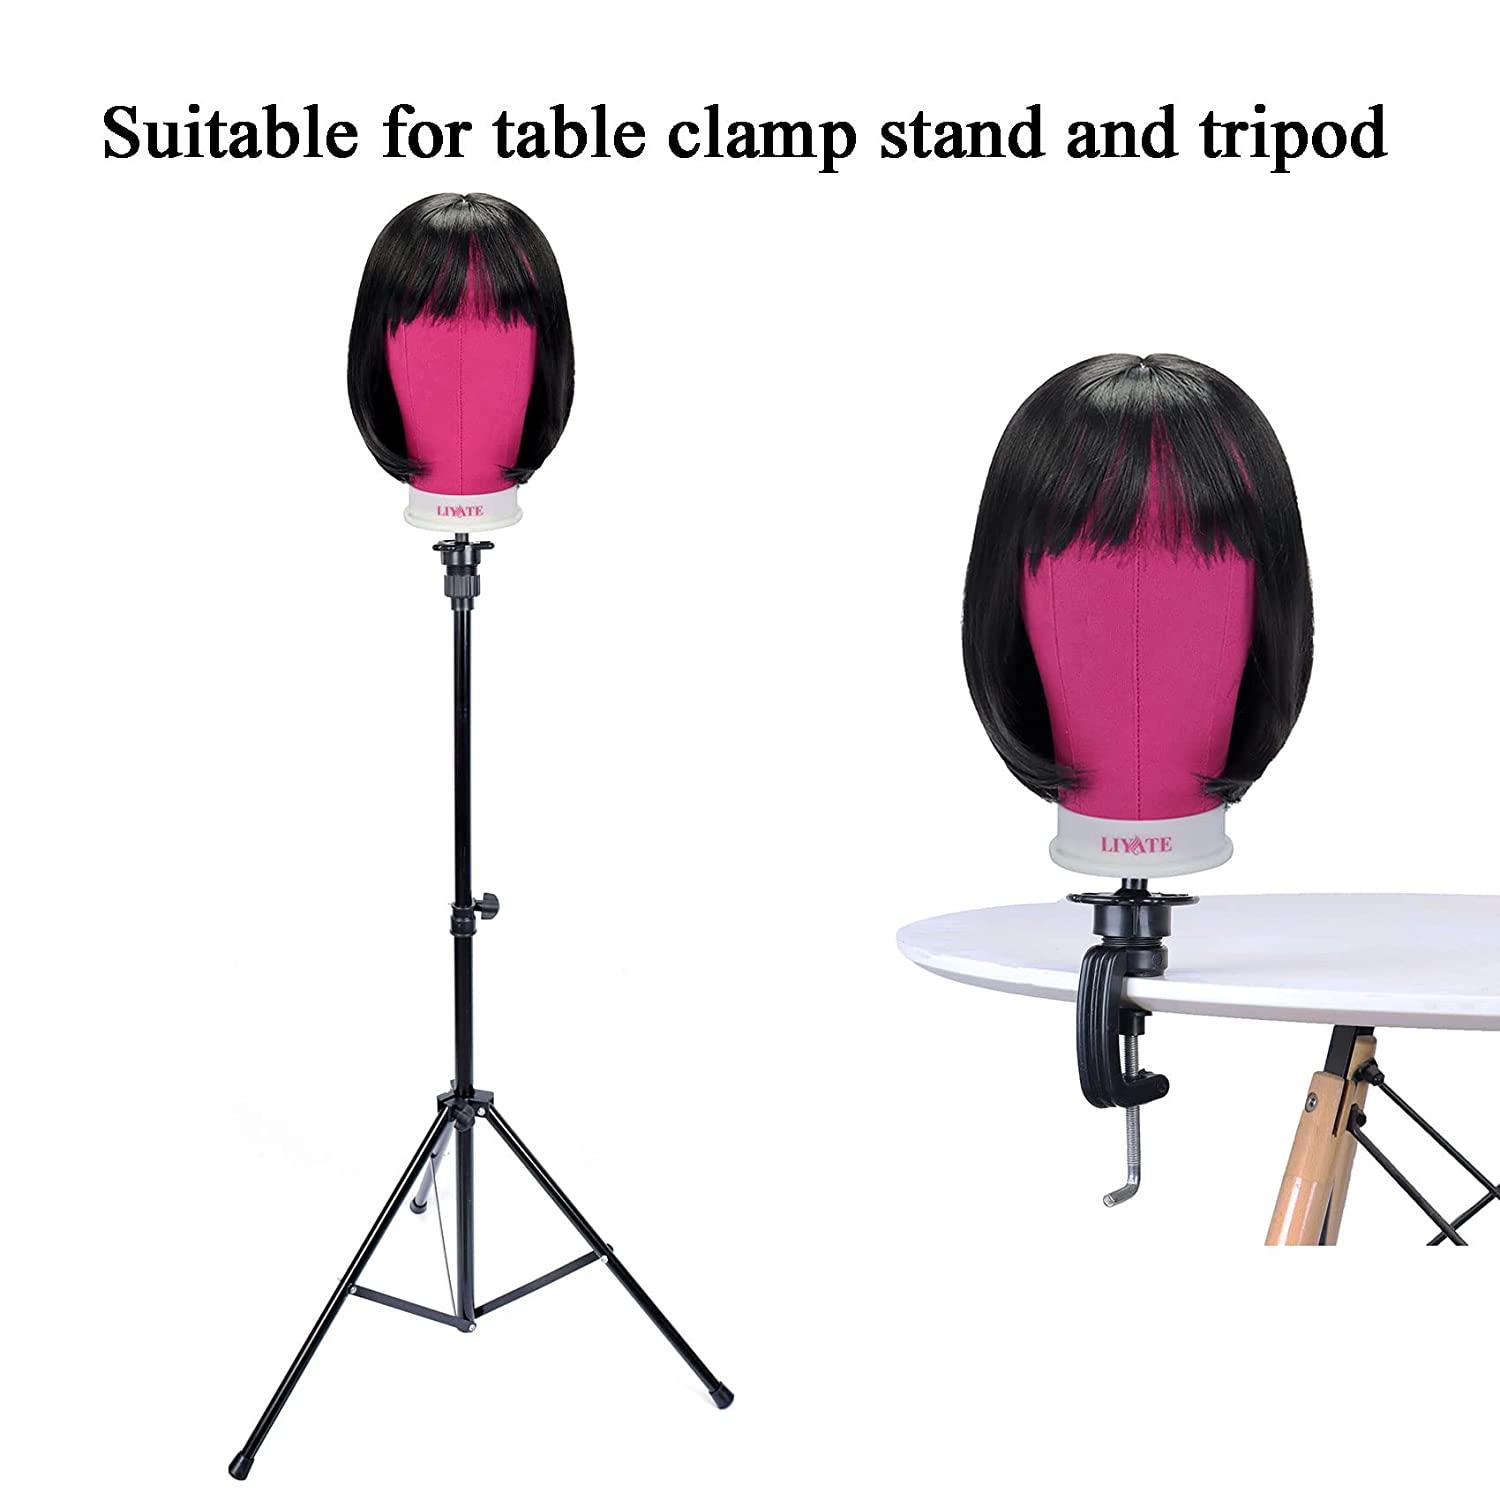 LUNGCYX 22 Inch Wig Head, Wig Stand Tripod with Mannequin Head,Wig Head  Stand with Canvas Head for Wigs Making Display with Table Clamp,Lace Wig